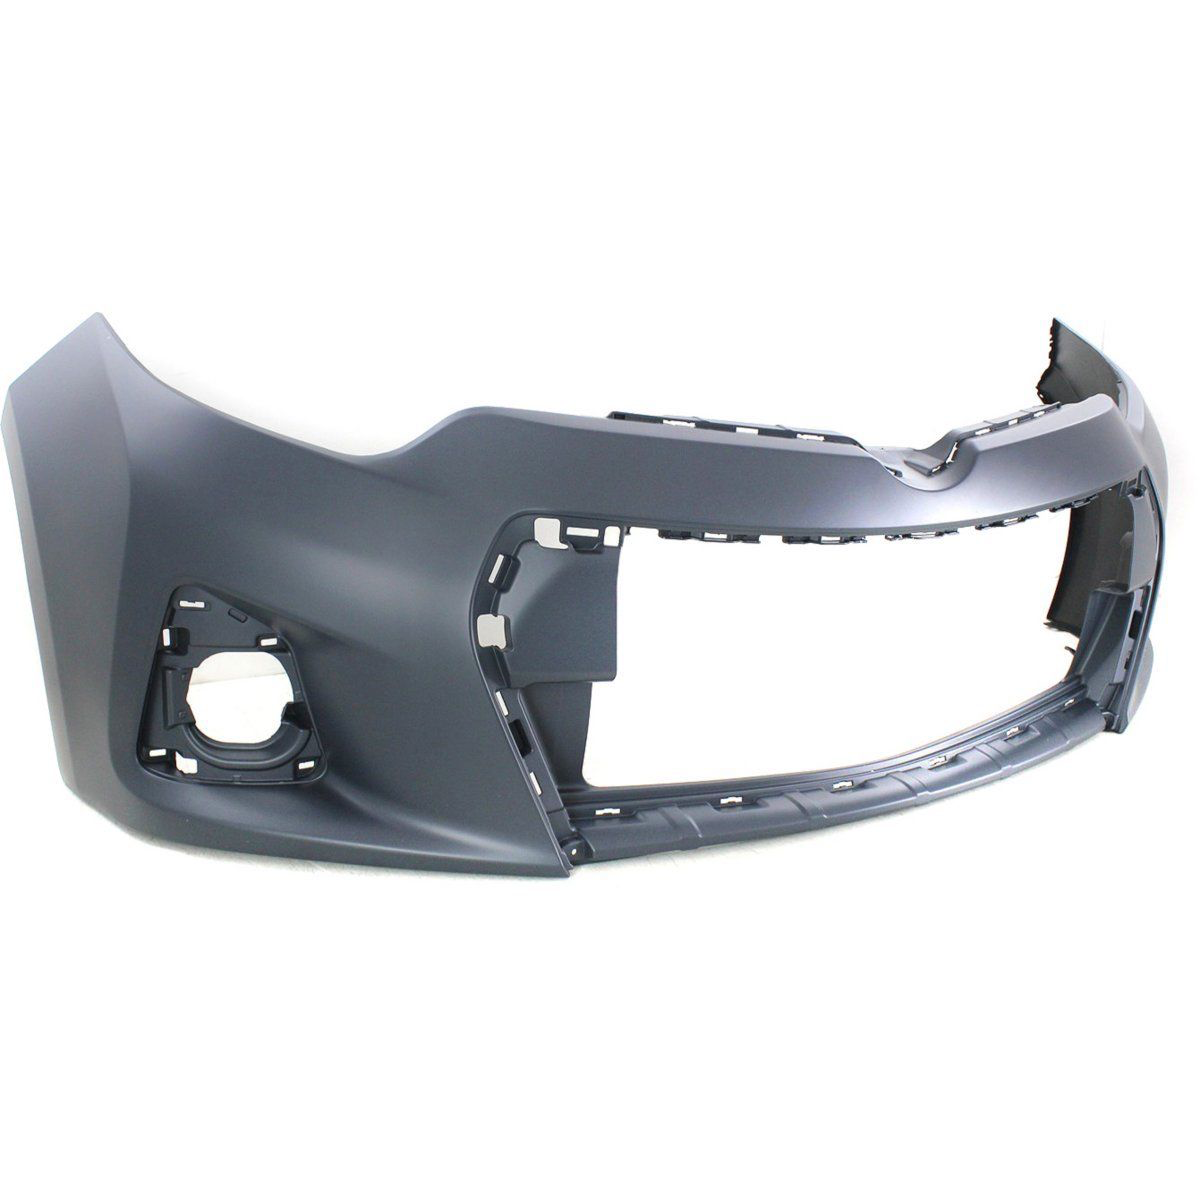 2014-2016 TOYOTA COROLLA Front Bumper Cover S  w/Chrome Grille Surround Painted to Match